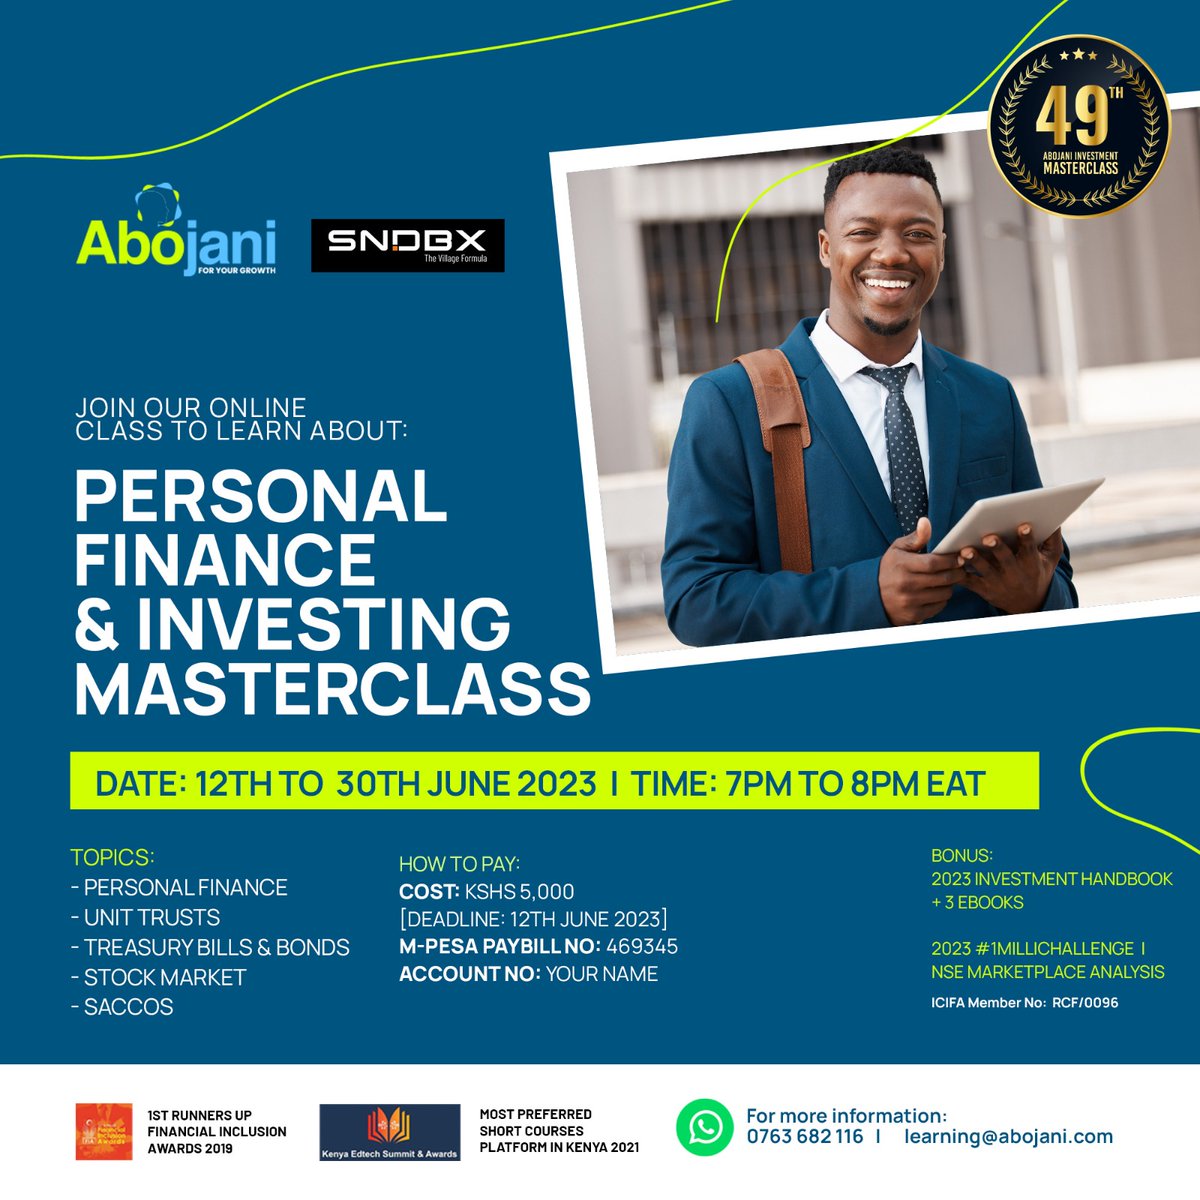 Whether you decide to join a Sacco or money market fund do your due diligence. @TheAbojani will be taking participants through SACCOs and Money Market Funds. 

Join our online masterclass and we will guide you to decide on Saccos Vs Money Market Funds. 8/8